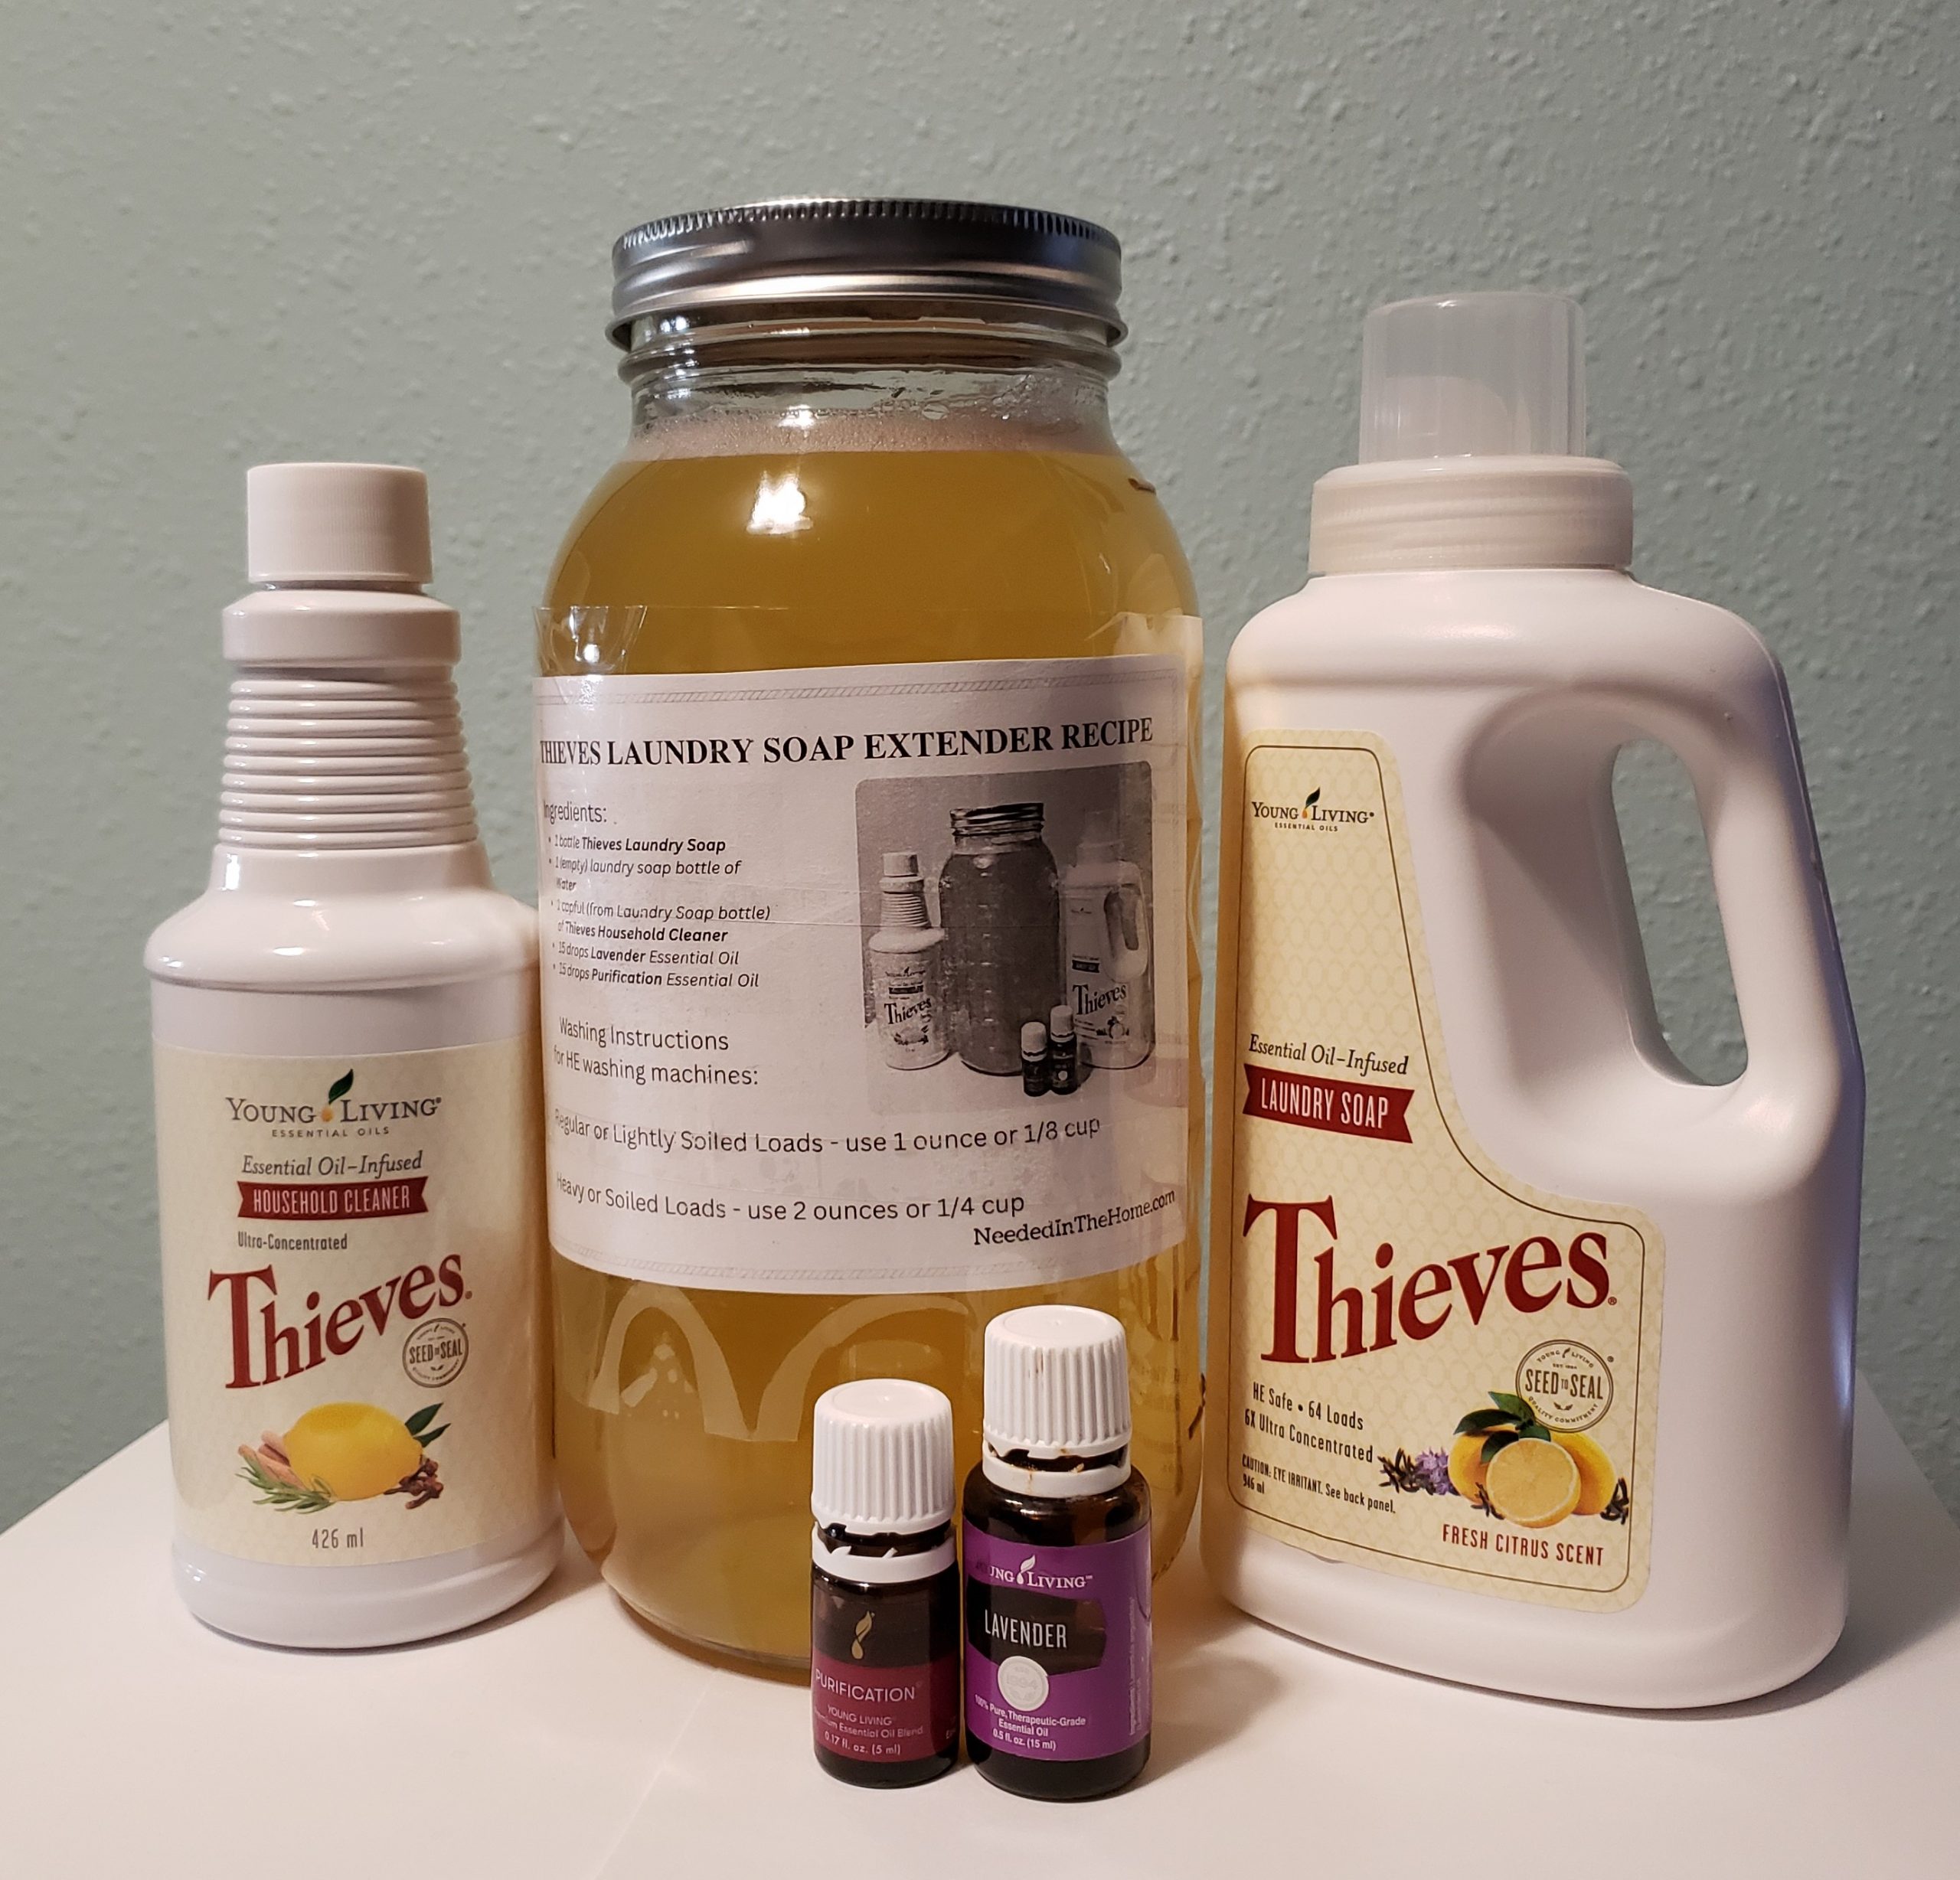 young living thieves household cleaner next to glass jar filled with amber fluid with recipe taped to front and lid on next to thieves laundry soap and purification blend and lavender essential oil